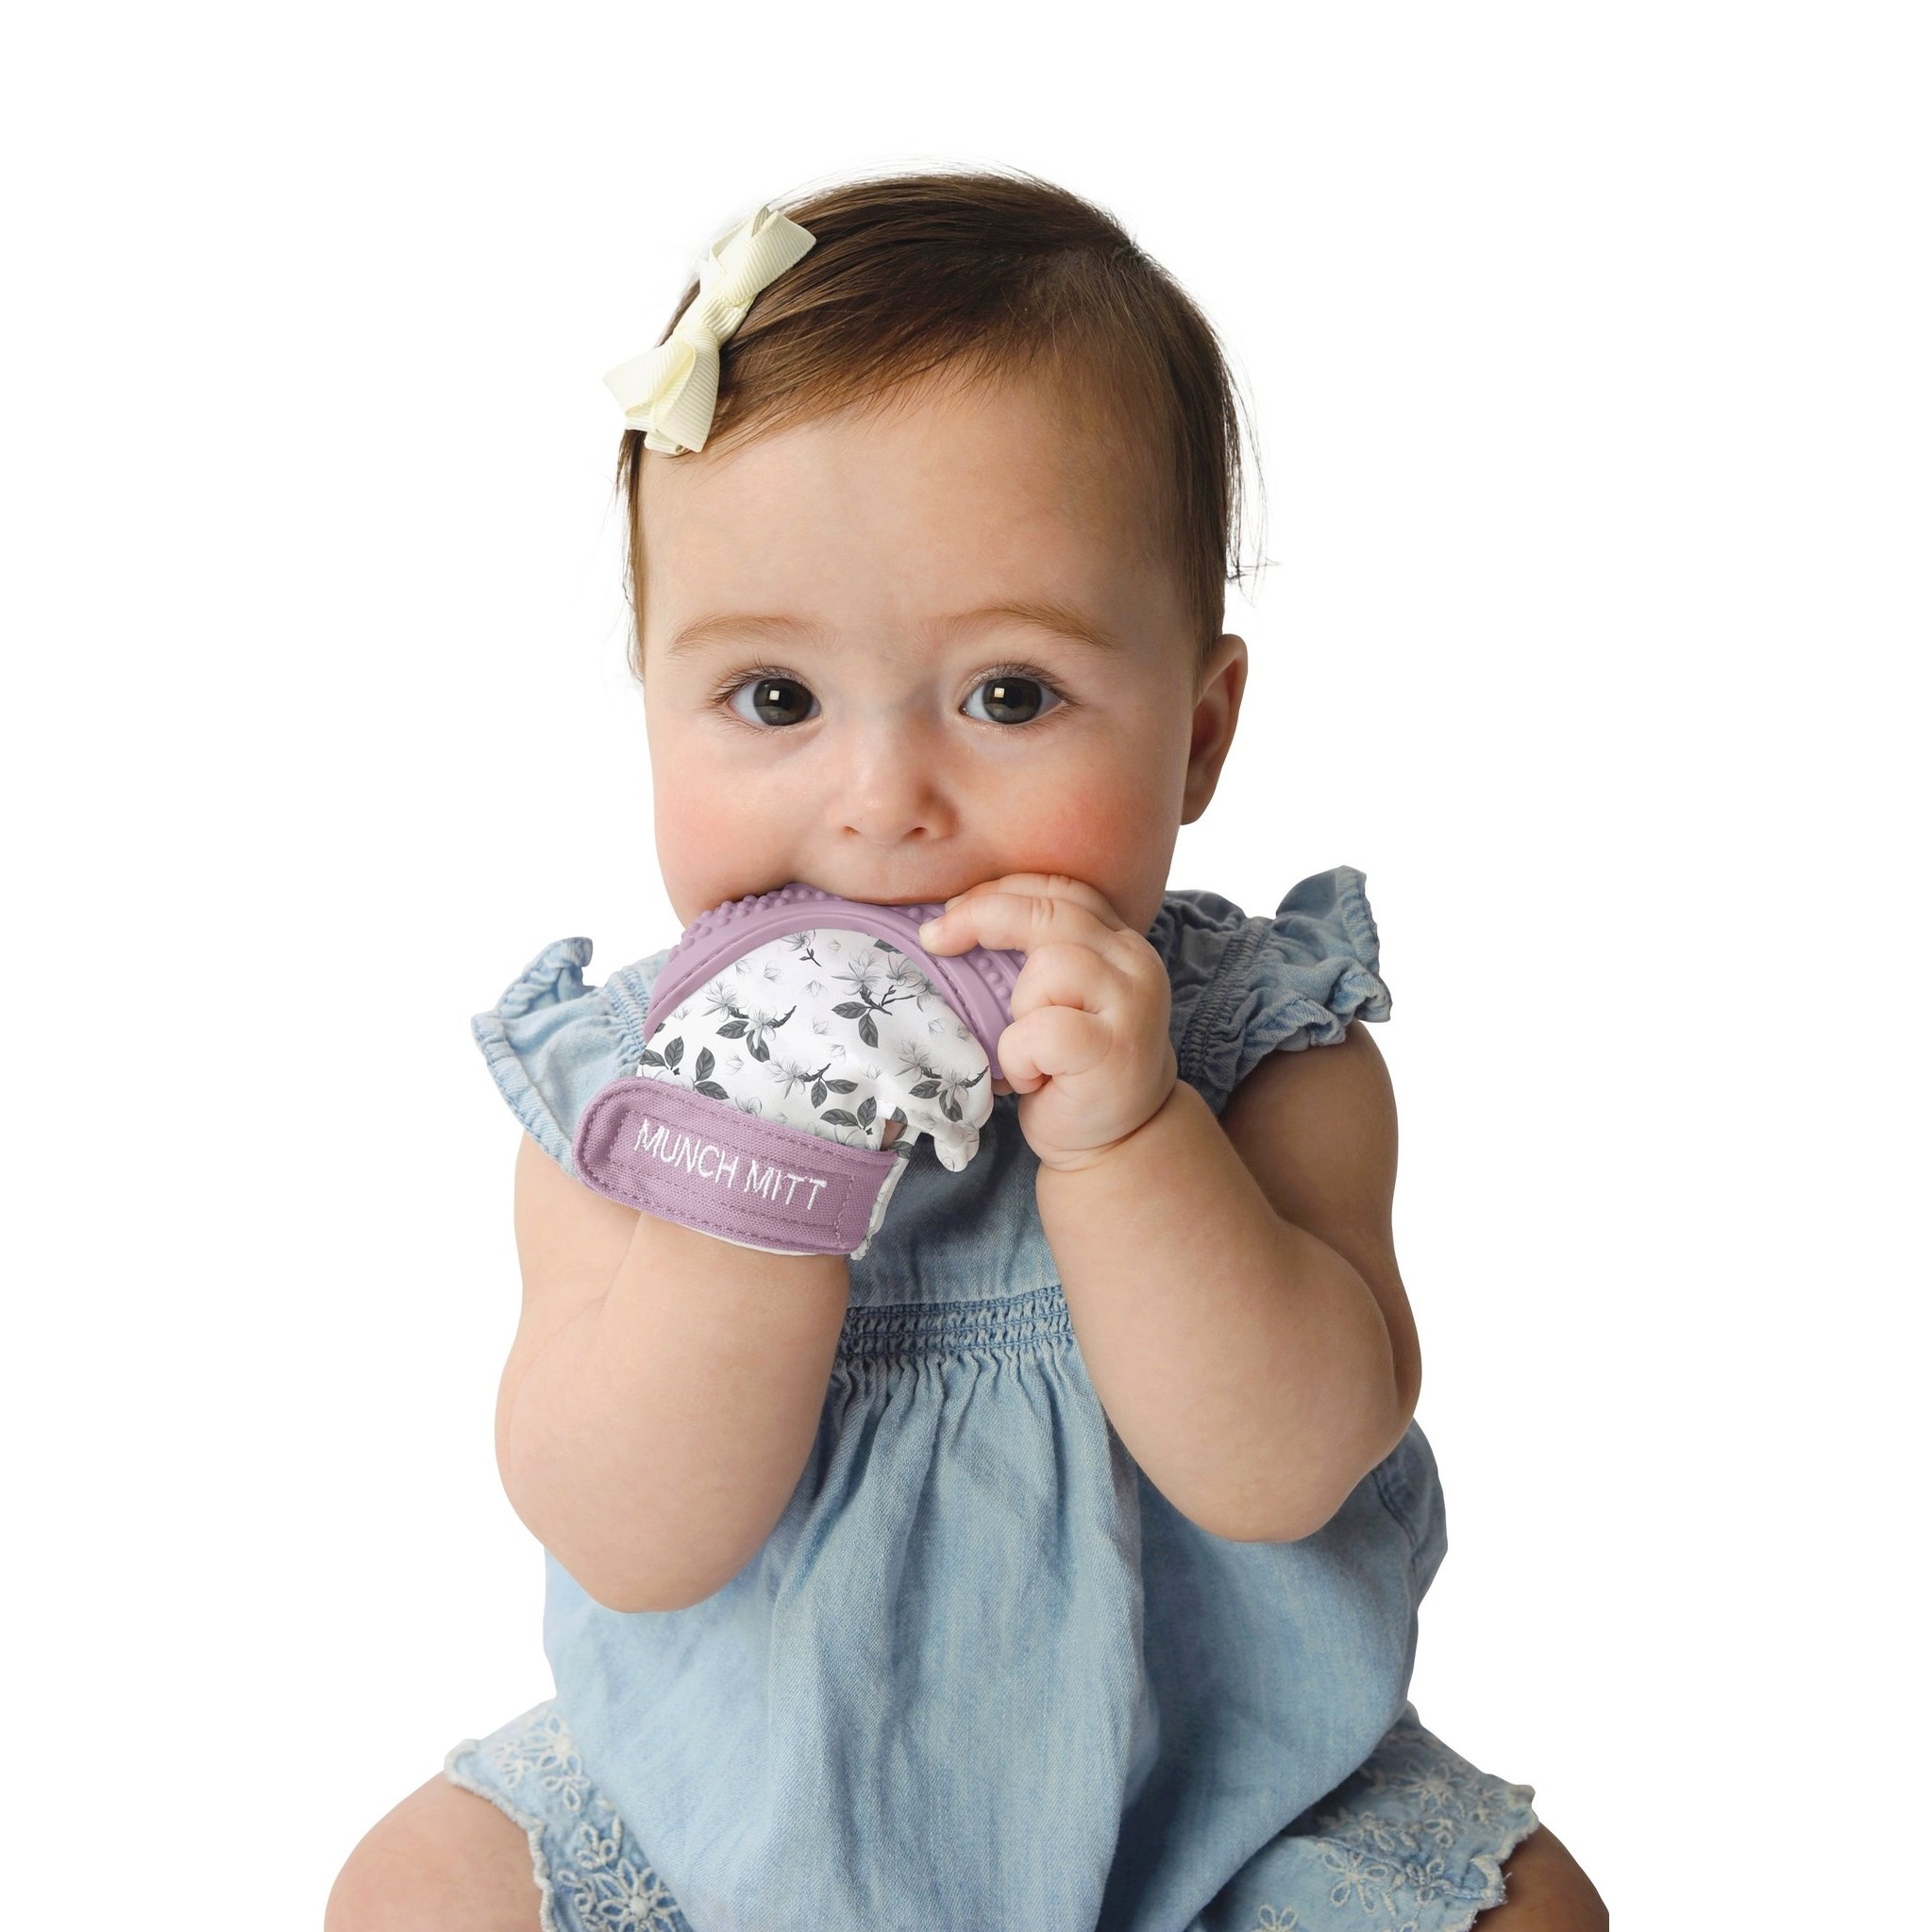 Protects Hands from Chewing & Saliva Heals Aching Gums Promotes Sound & Visual Stimulation for Babies Up to 1-Year-Old Munch Mitt Baby Chew Toy Malarkey Kids Baby Teething Mitten Night Forest 